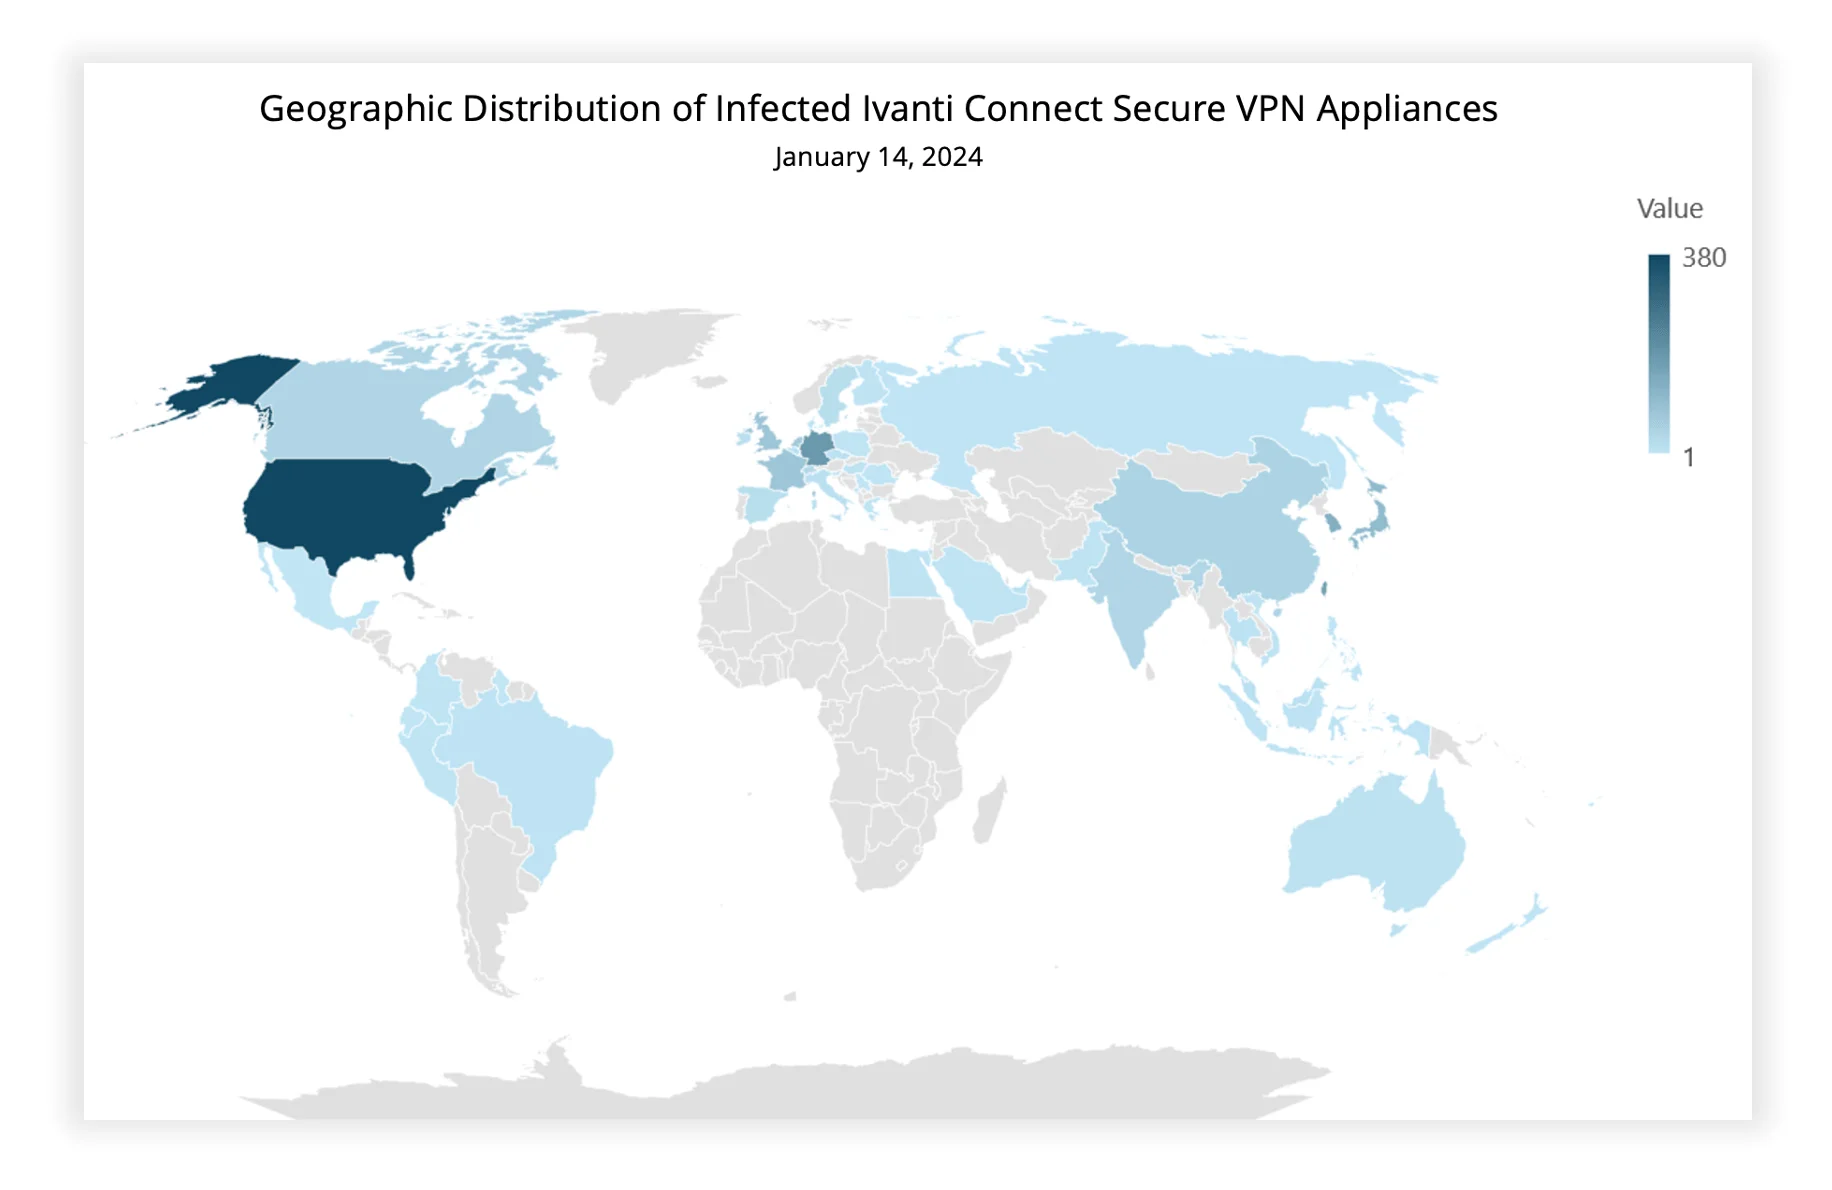 Geographic distribution of infected appliances (Volexity)